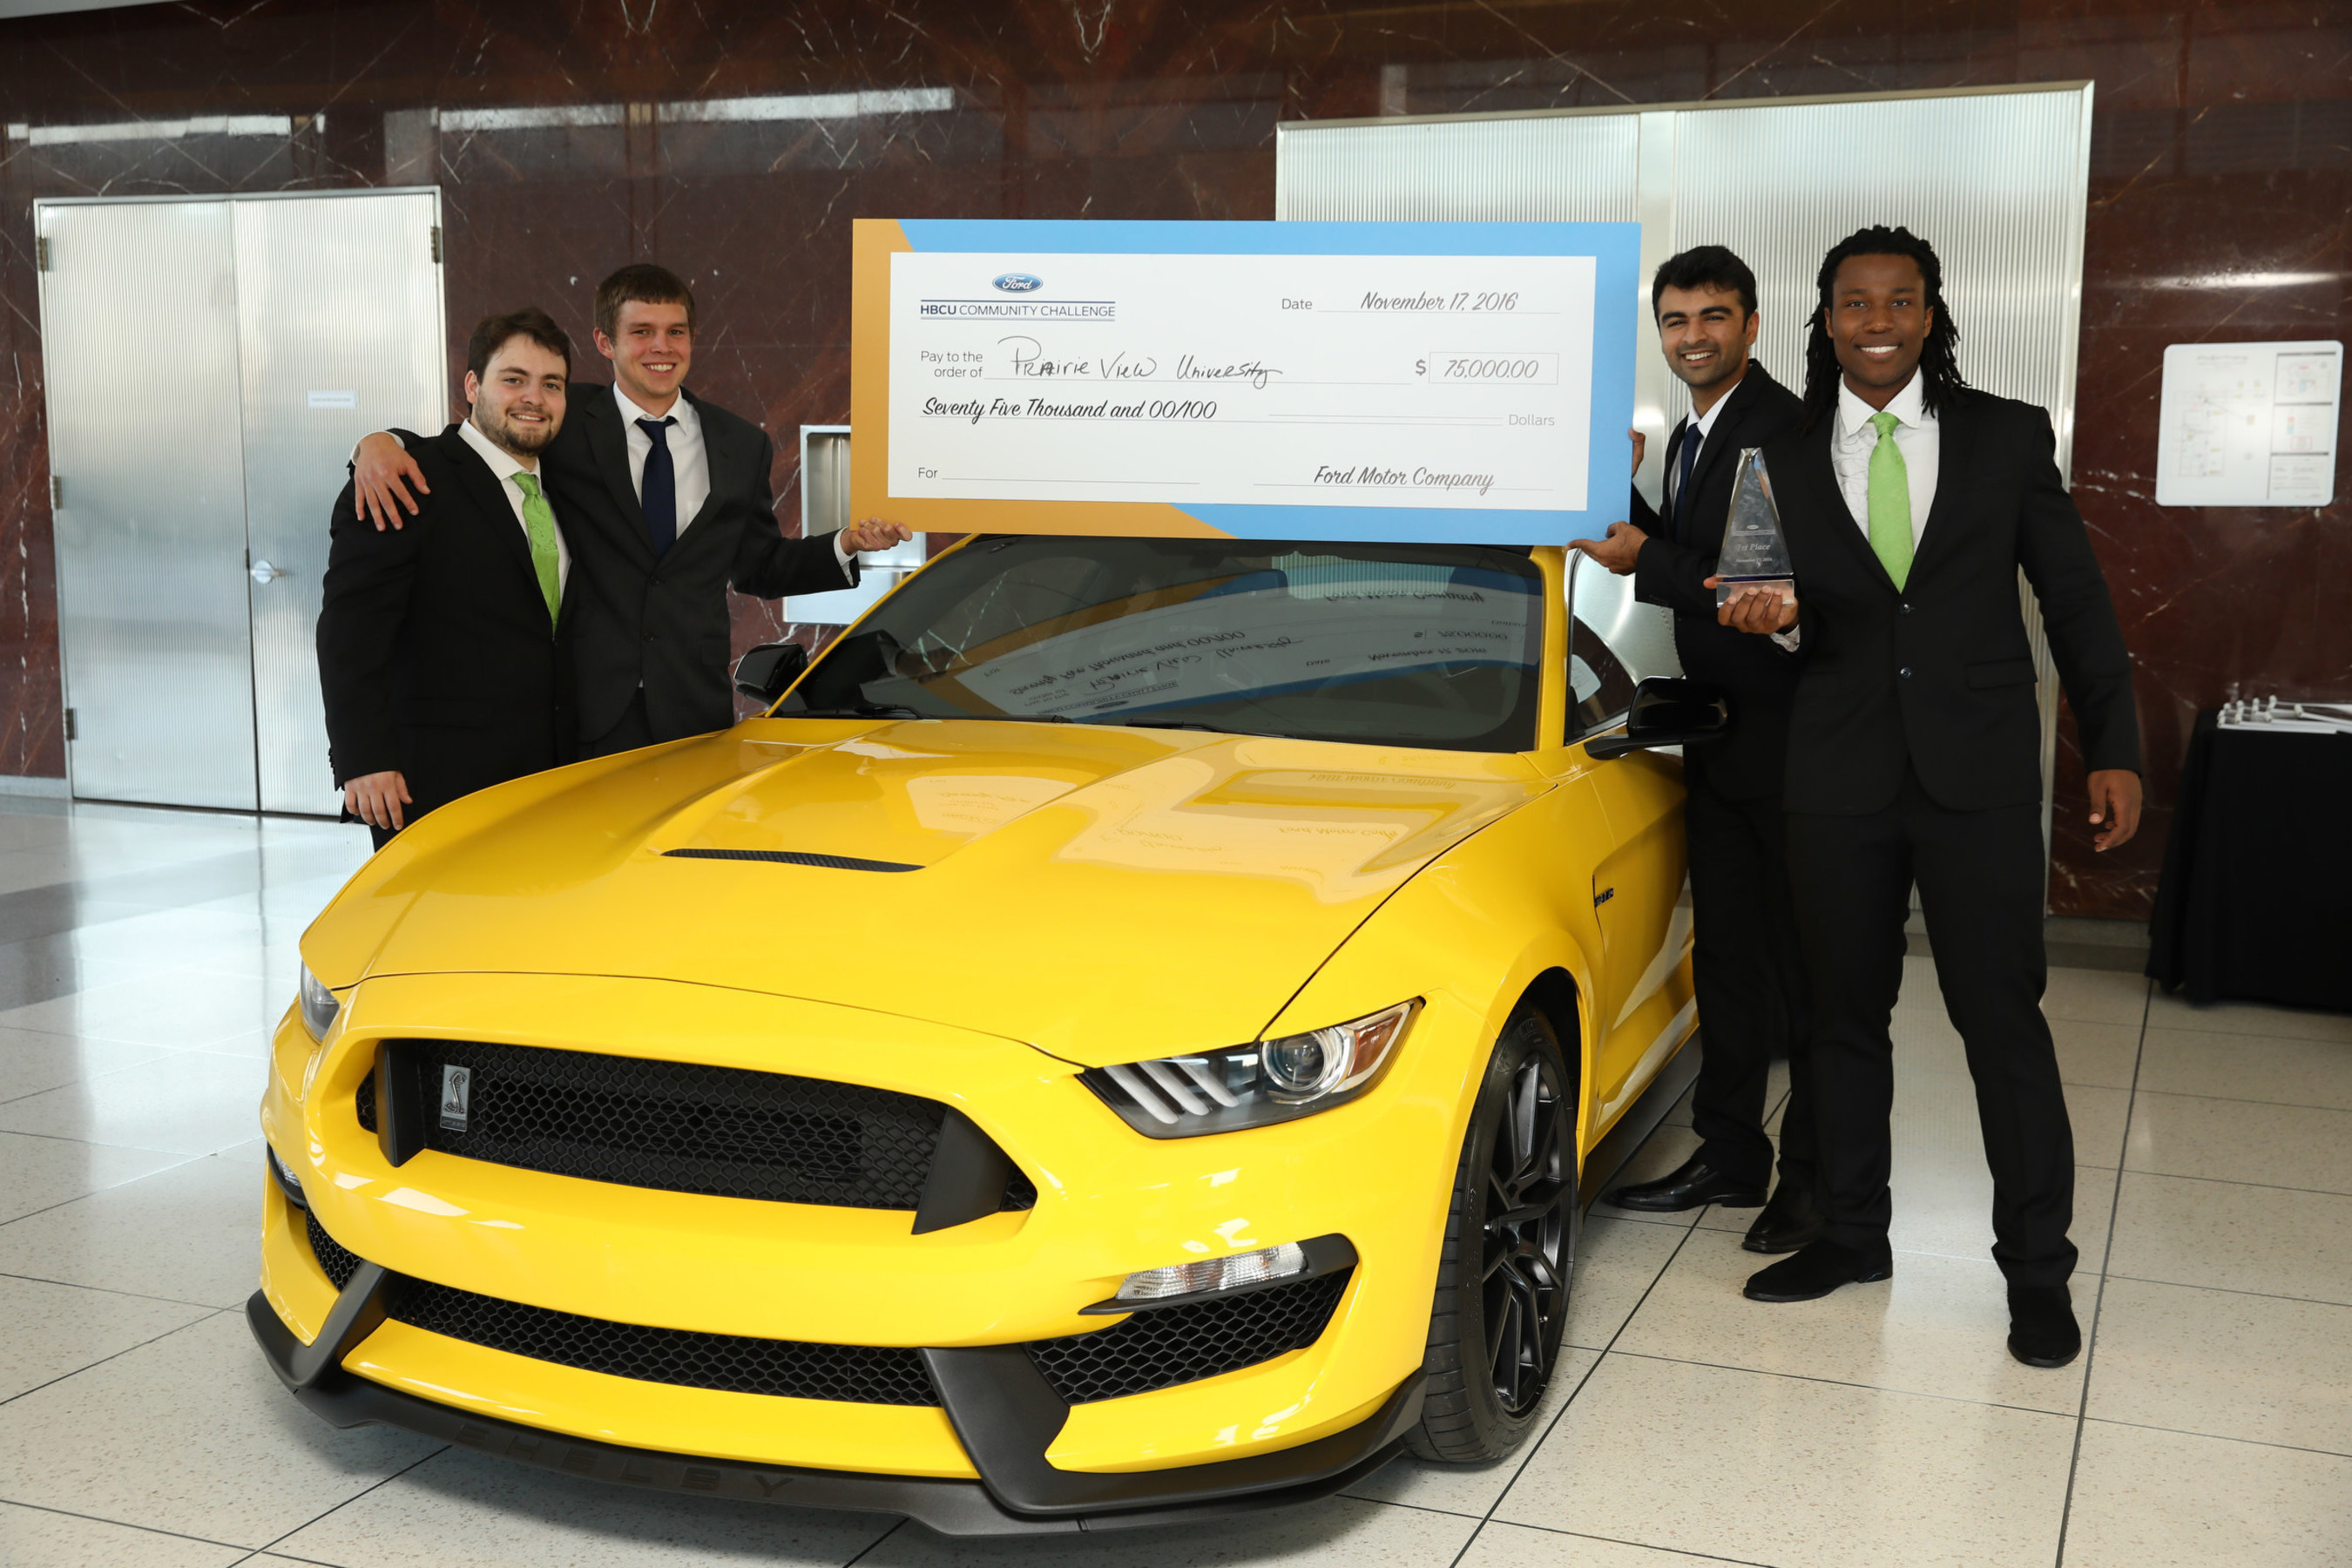 Students of Prairie View A&M University win 2016 Ford HBCU Community Challenge after presenting innovative app in front of judges including Tom Joyner and Henry Ford III at Ford World Headquarters.